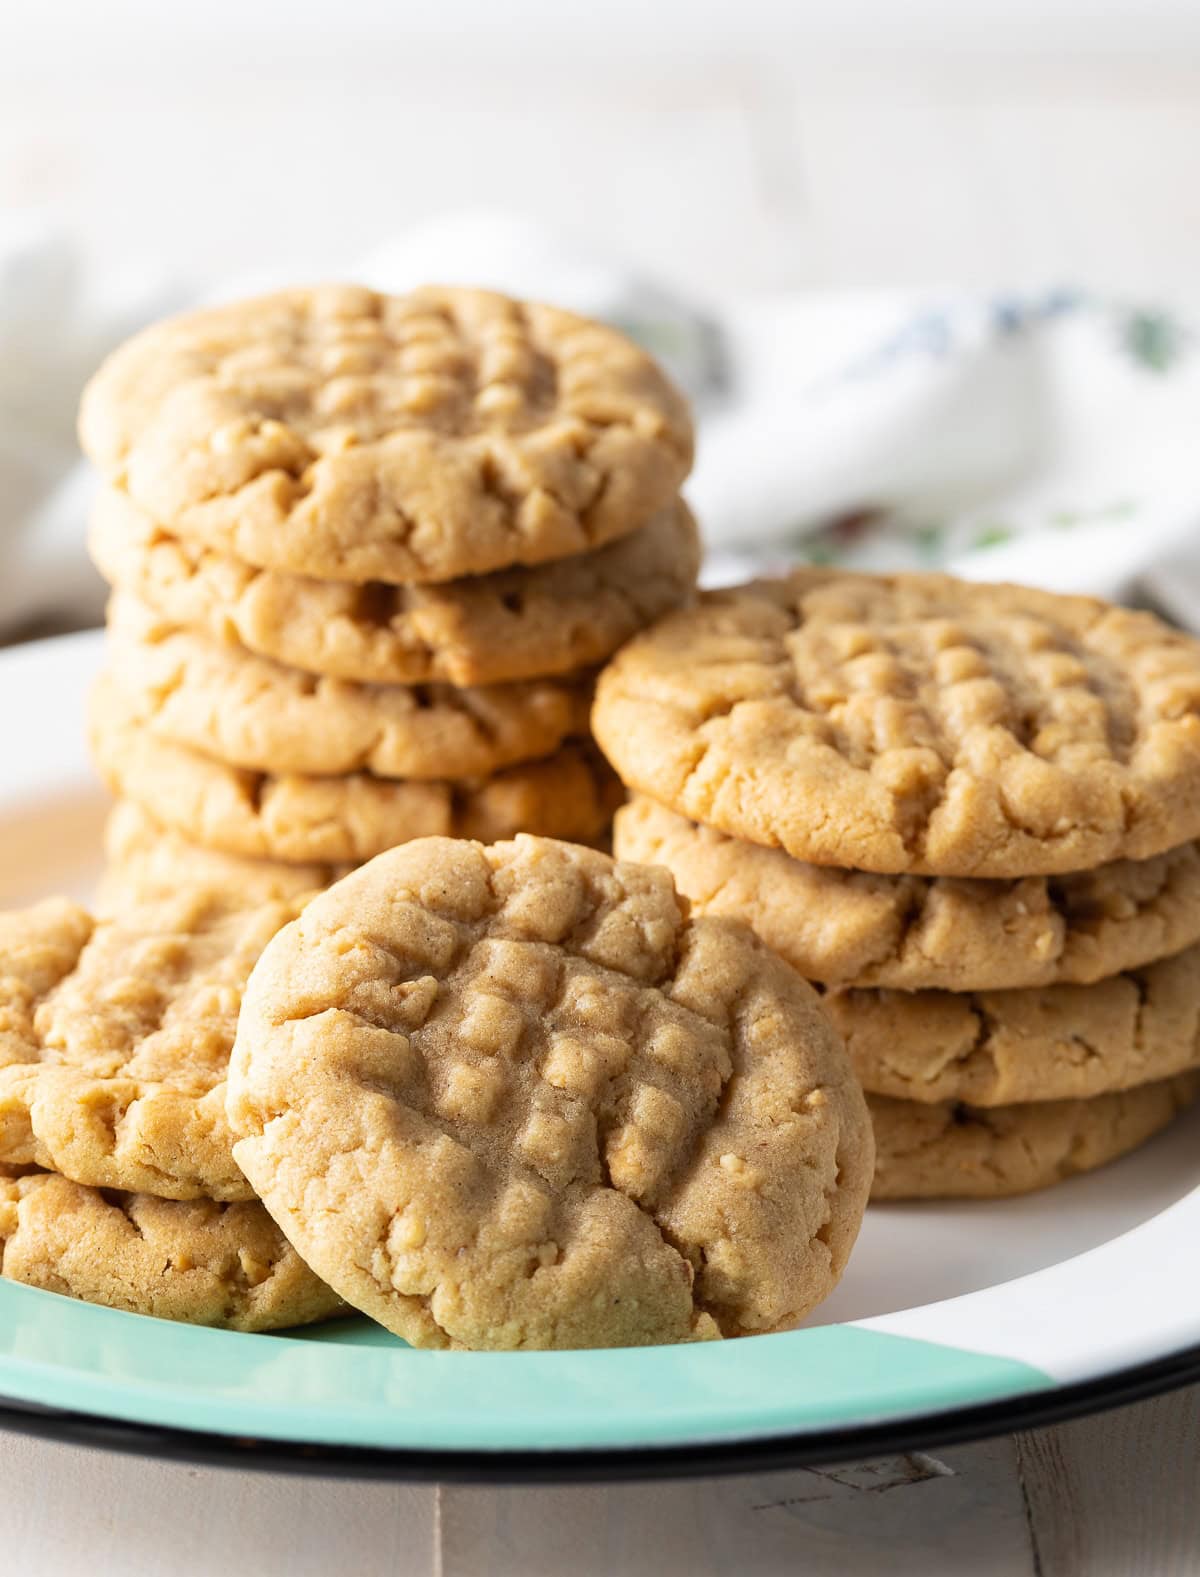 Best Peanut Butter Cookies Recipe (VIDEO) - A Spicy Perspective